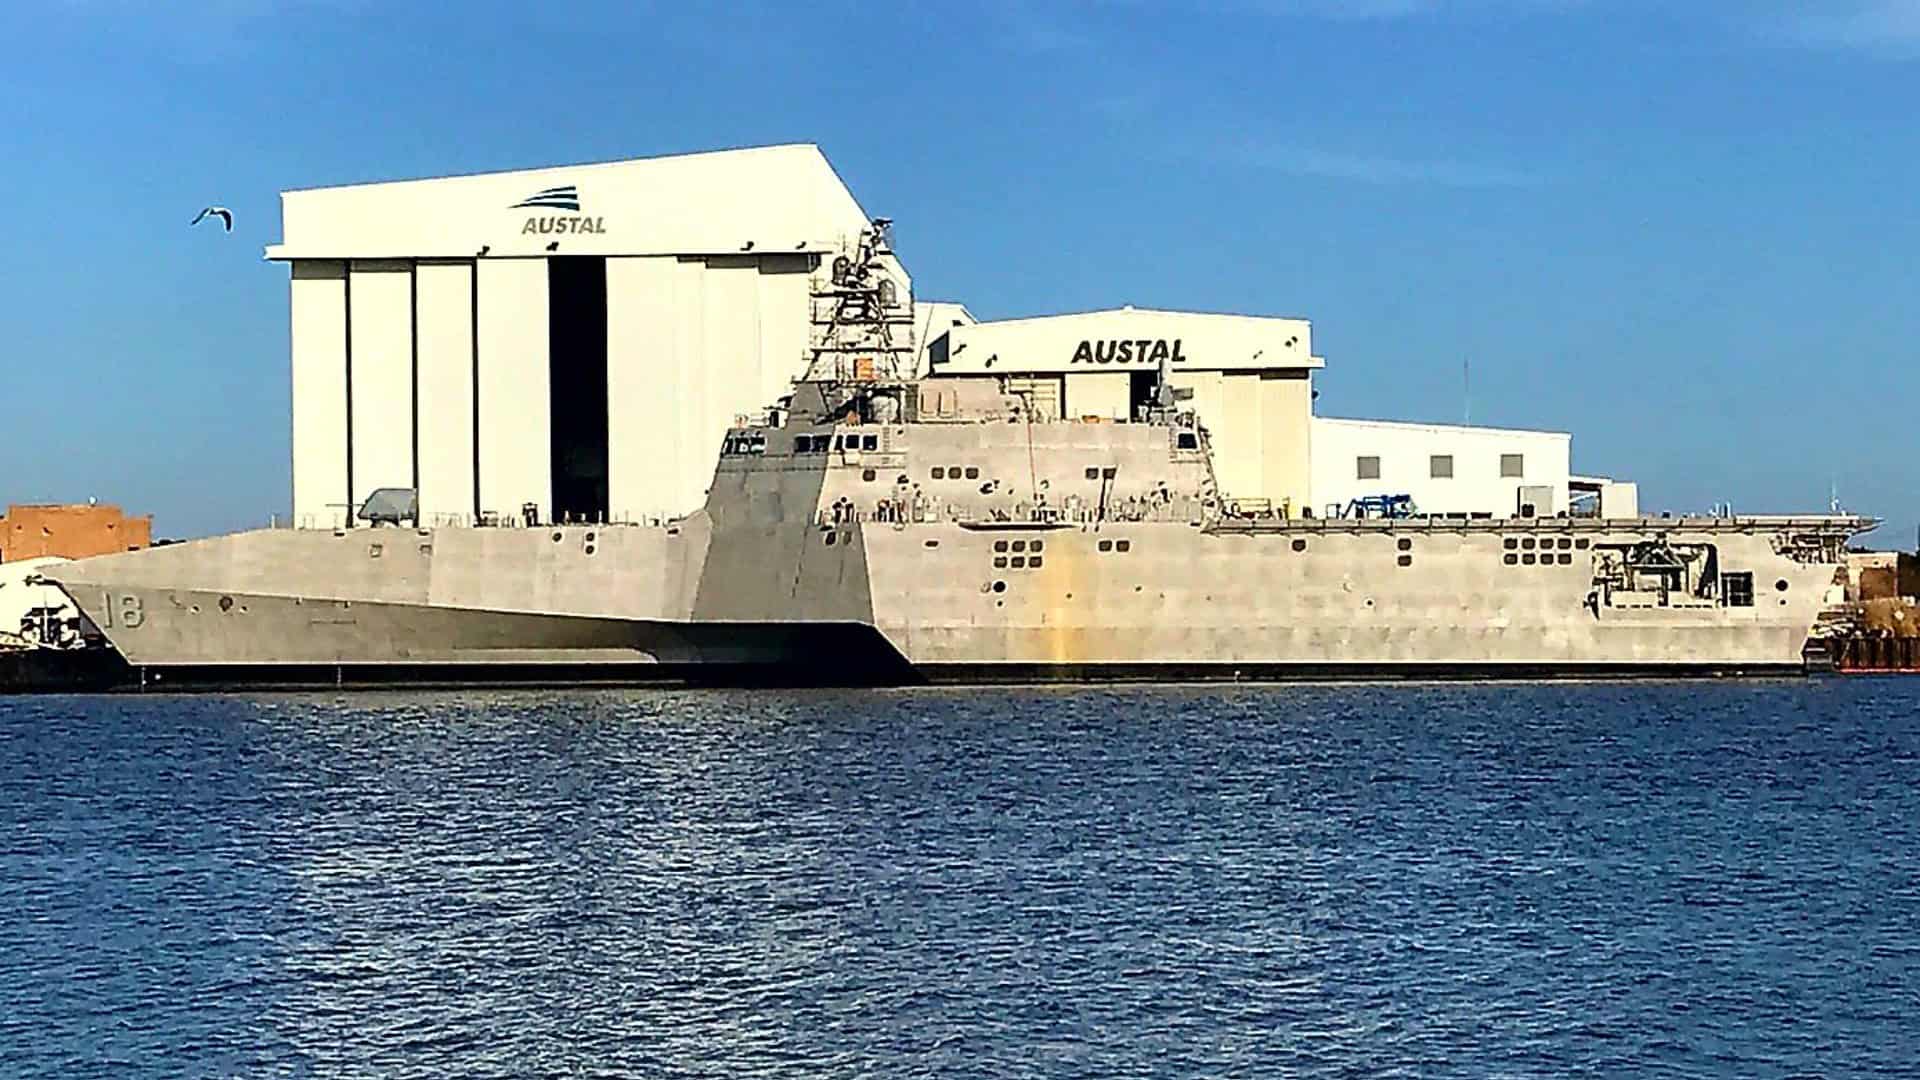 The U.S. Navy littoral combat ship USS Charleston (LCS-18) fitting out at the Austal USA shipyard in Mobile, Alabama (USA)